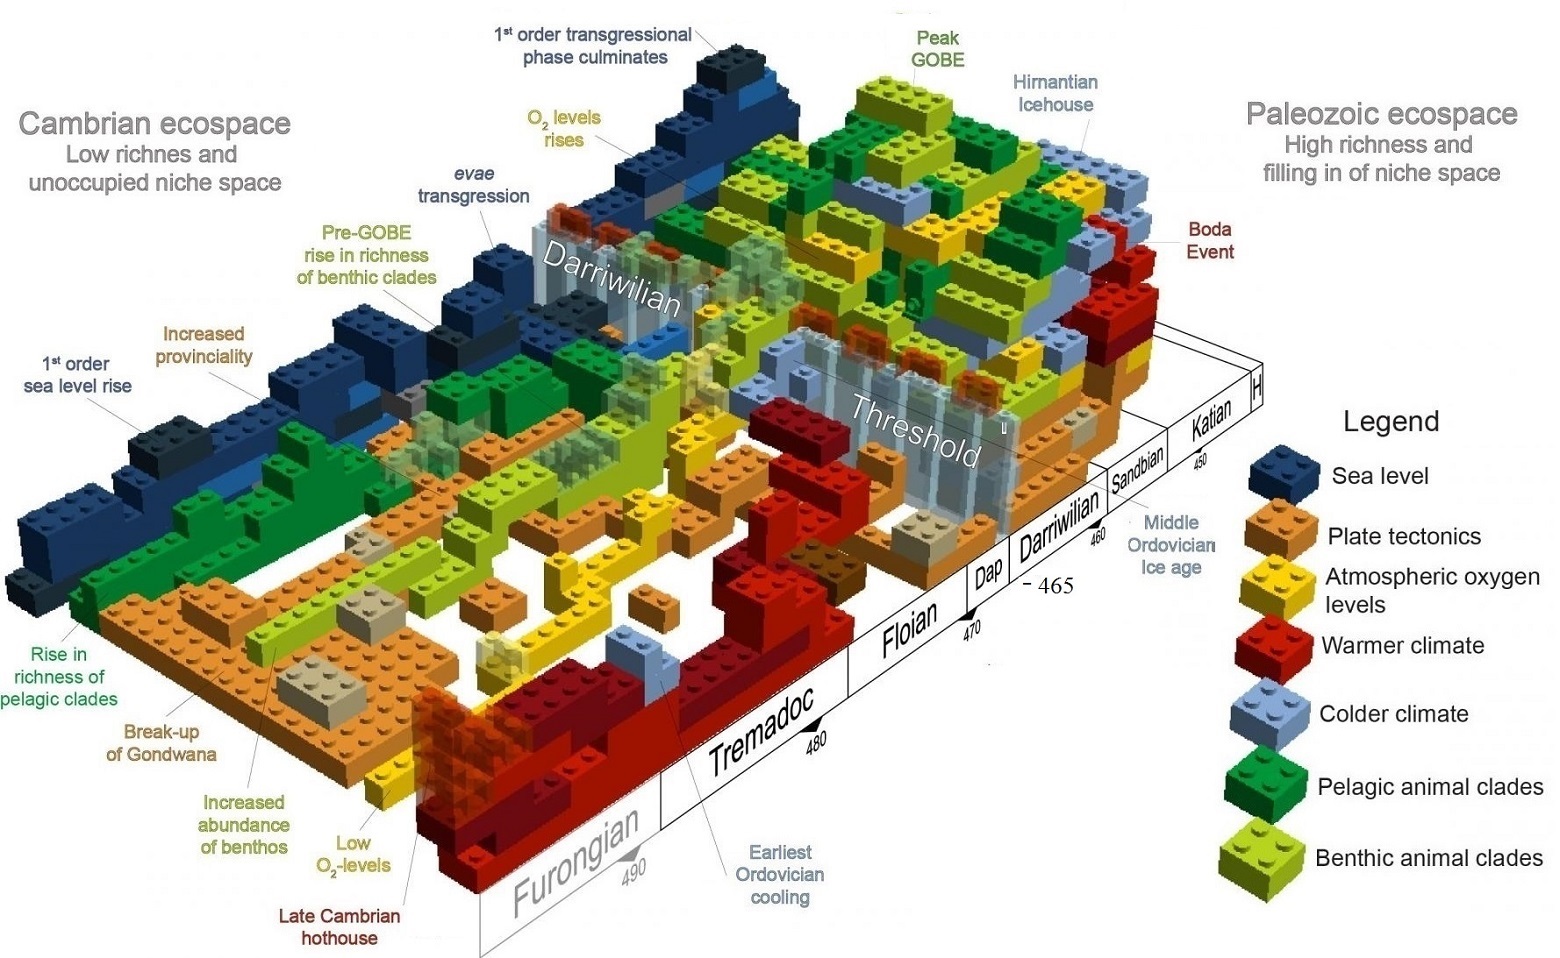 post-modern global fitness landscape with Legos